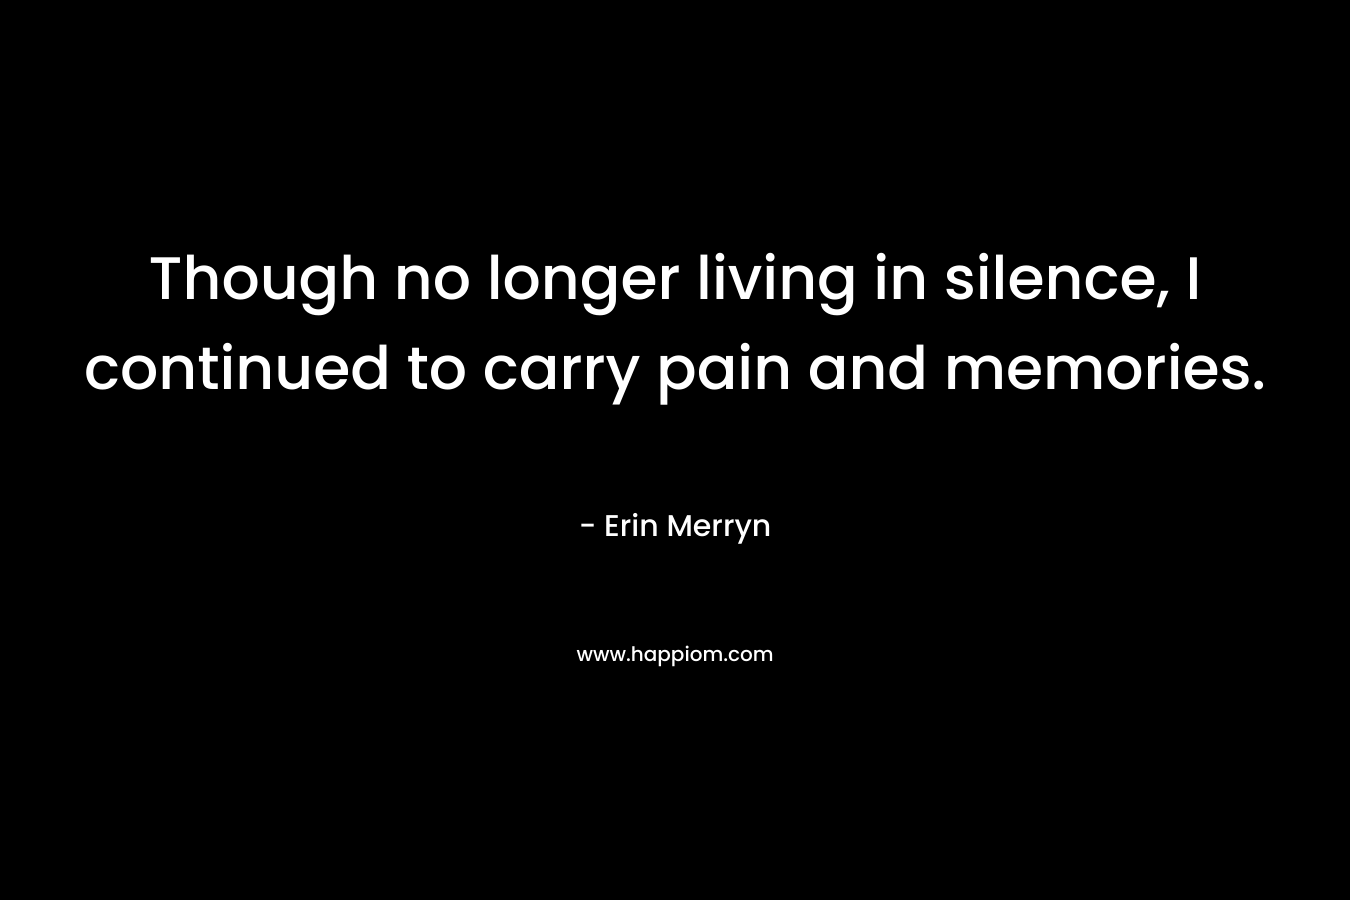 Though no longer living in silence, I continued to carry pain and memories. – Erin Merryn